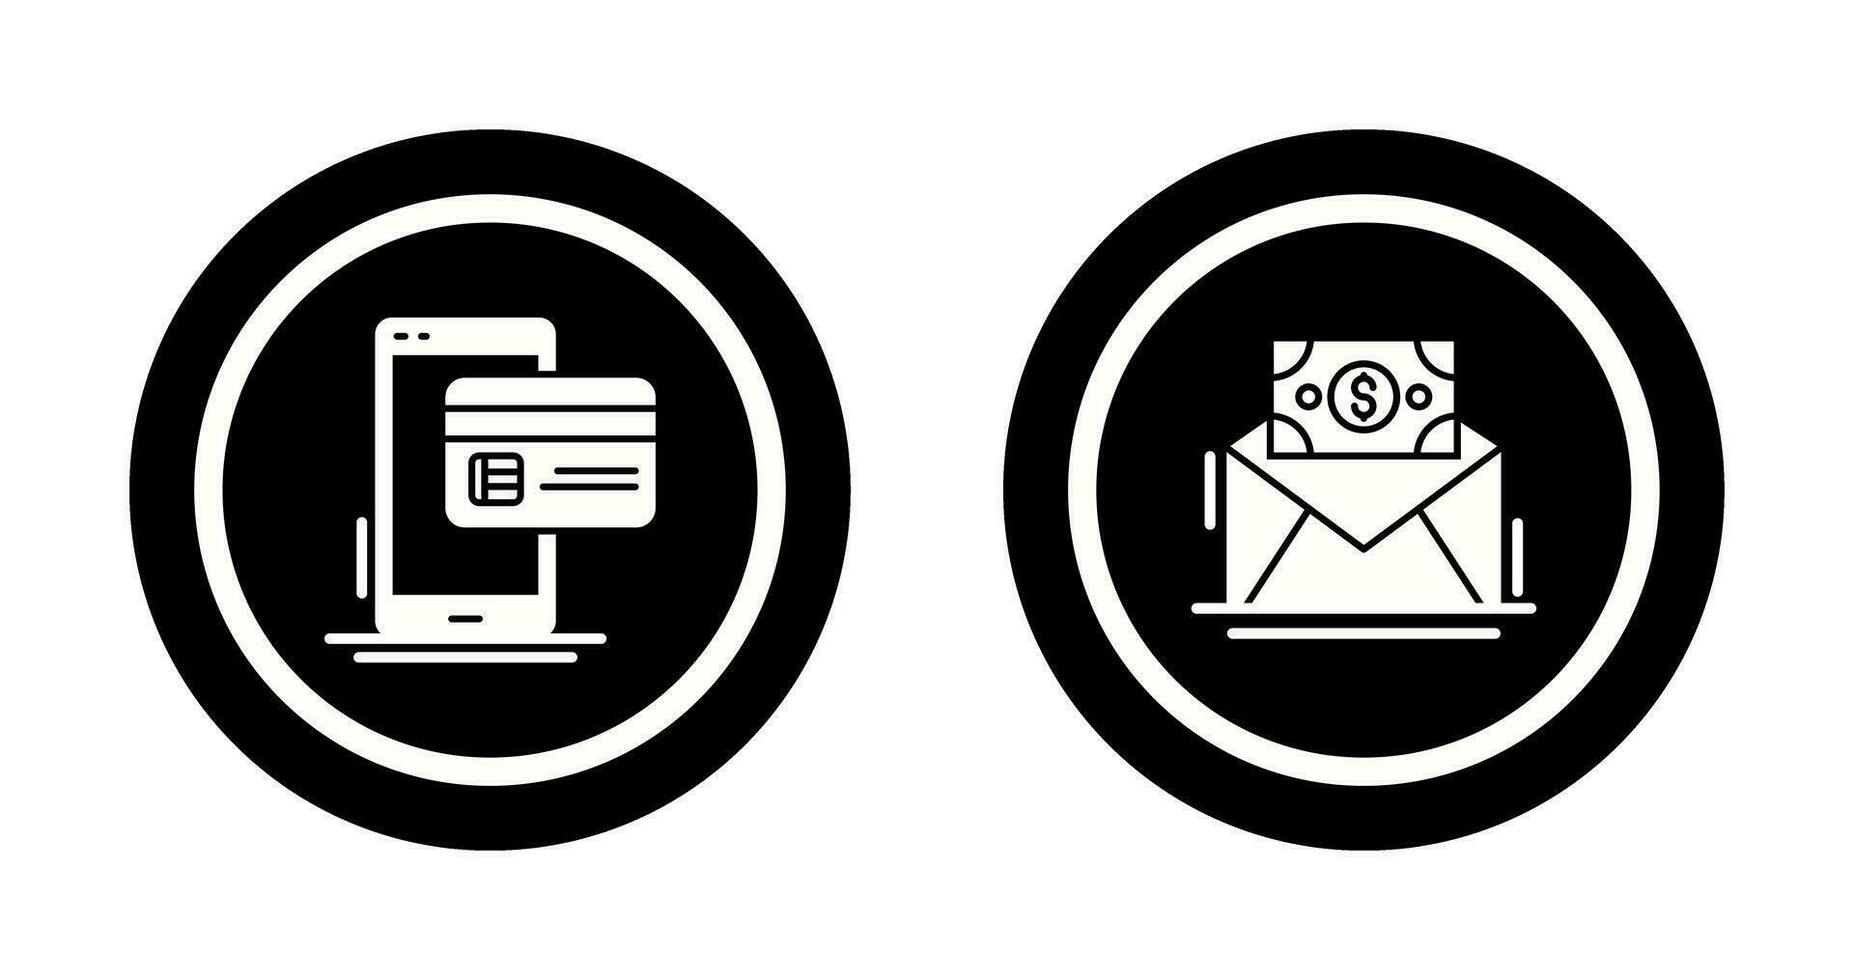 Cashless Payment and Mail Coin Icon vector